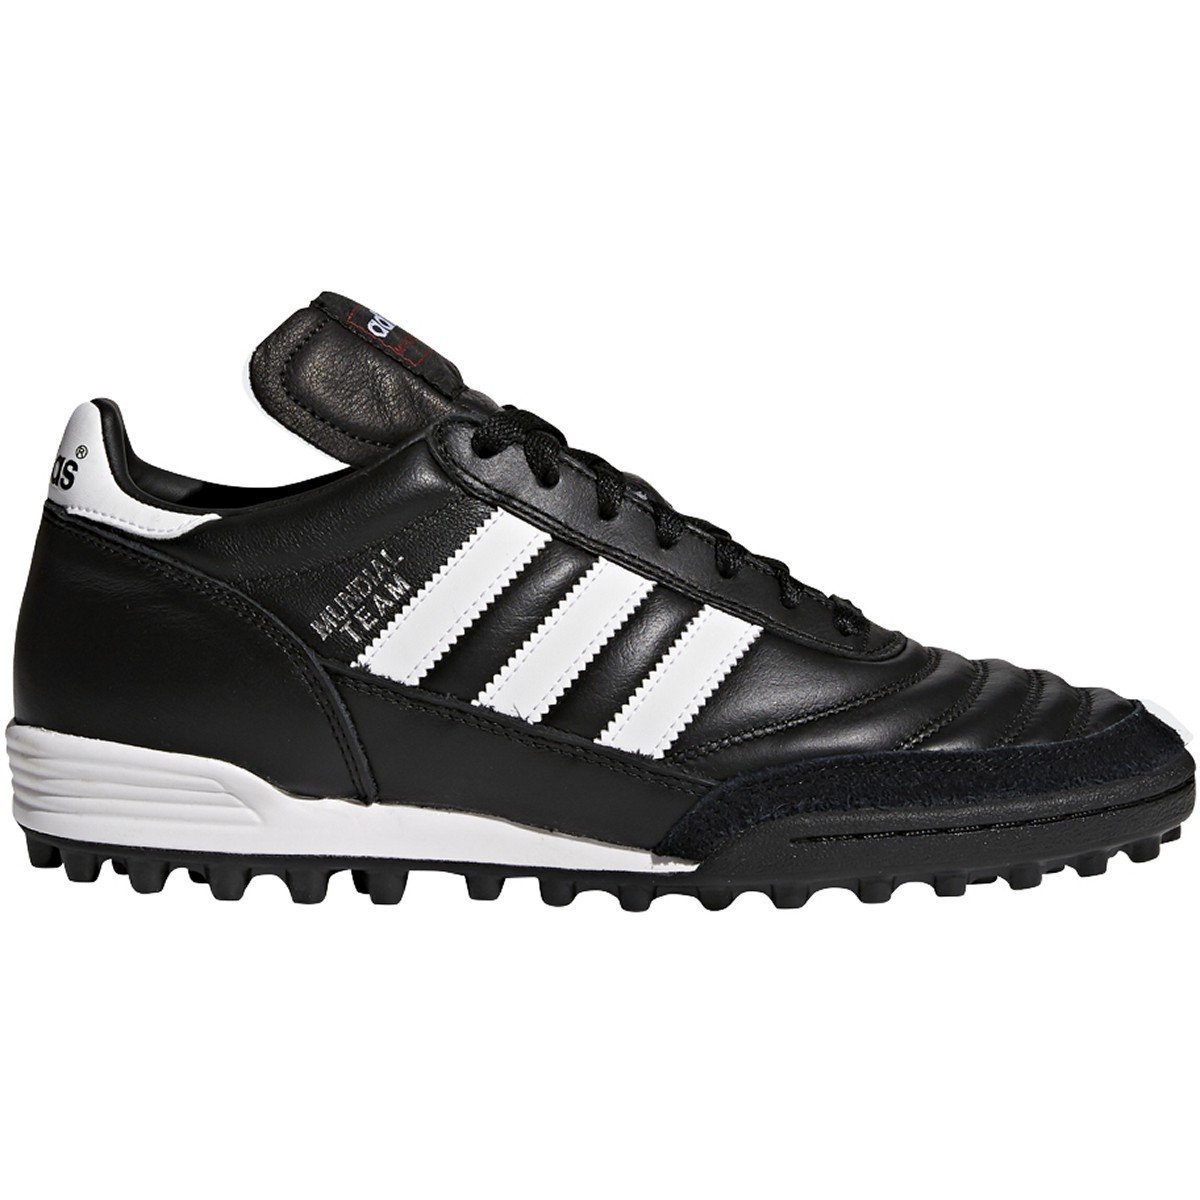 Adidas Mundial Team Leather Soccer Turf Cleats |